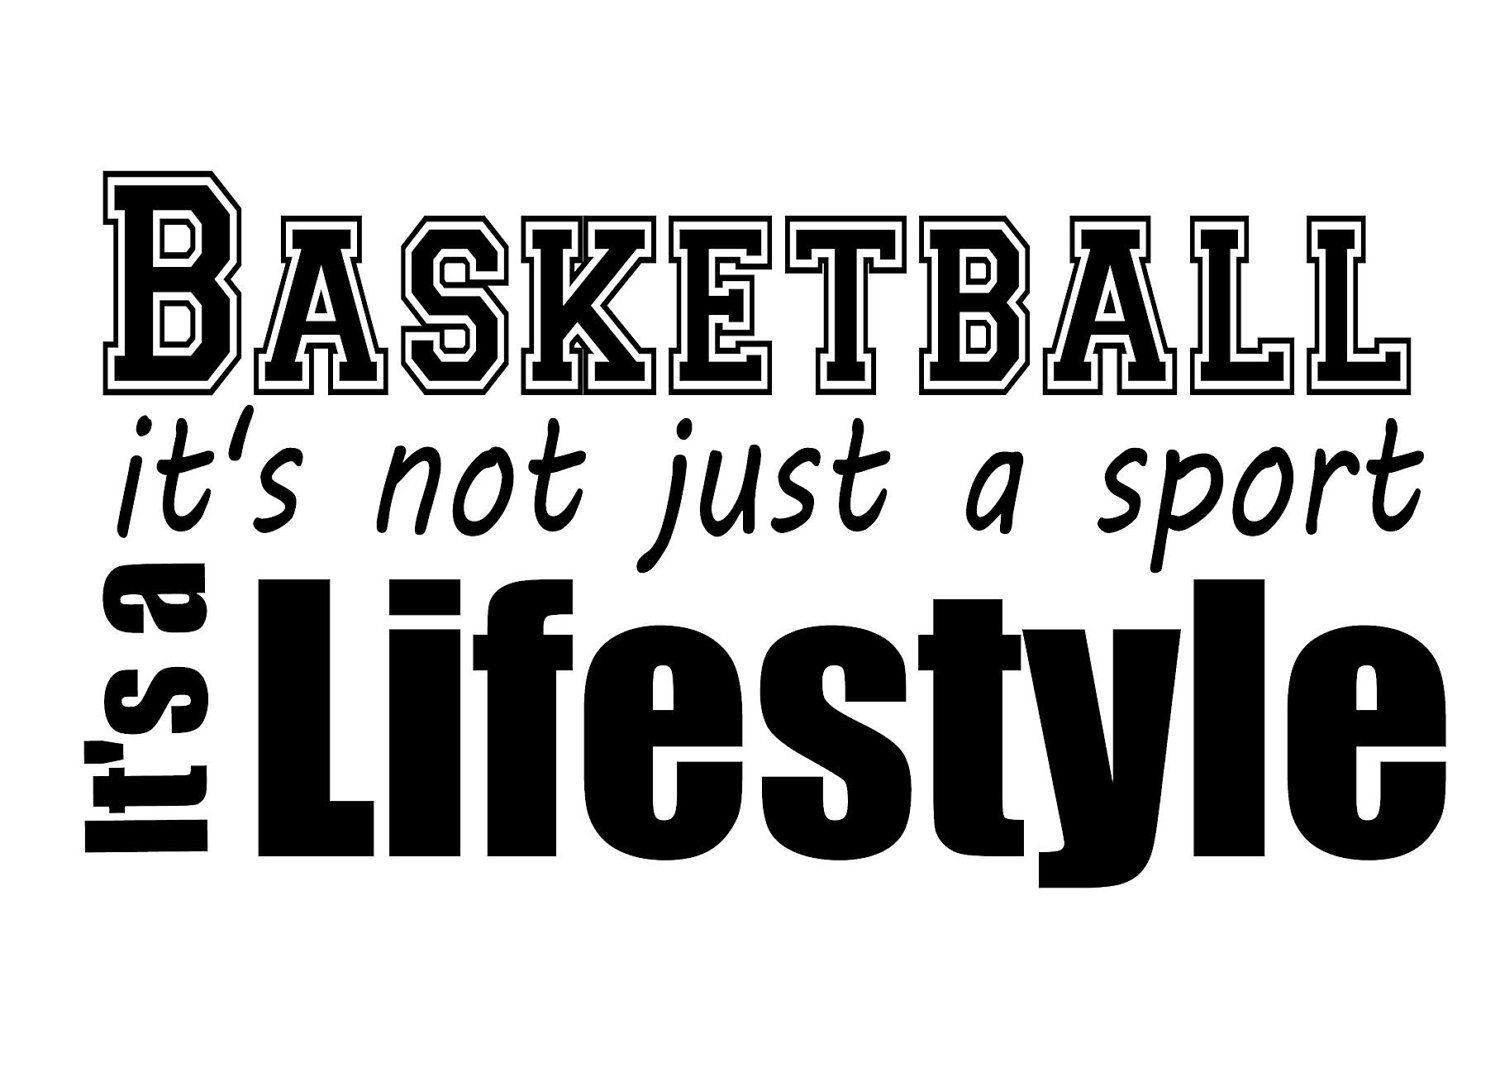 Basketball Inspirational Quotes. QUOTES OF THE DAY